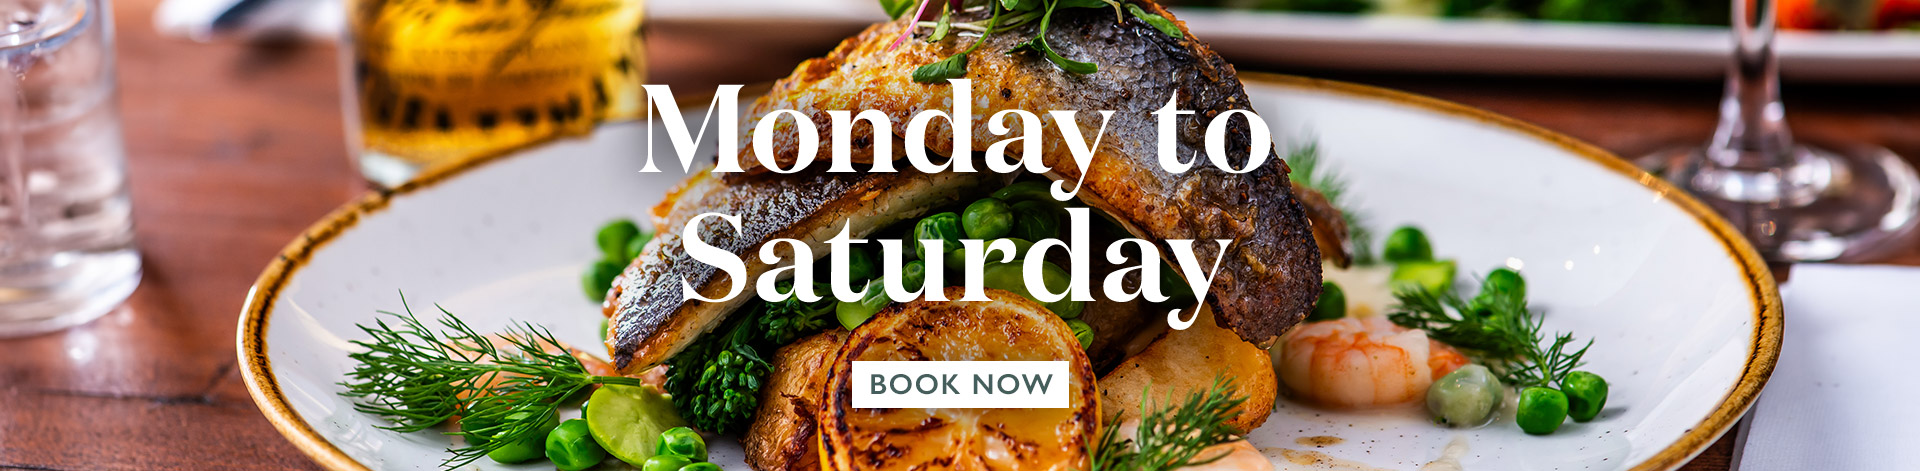 Book now at The Chequers